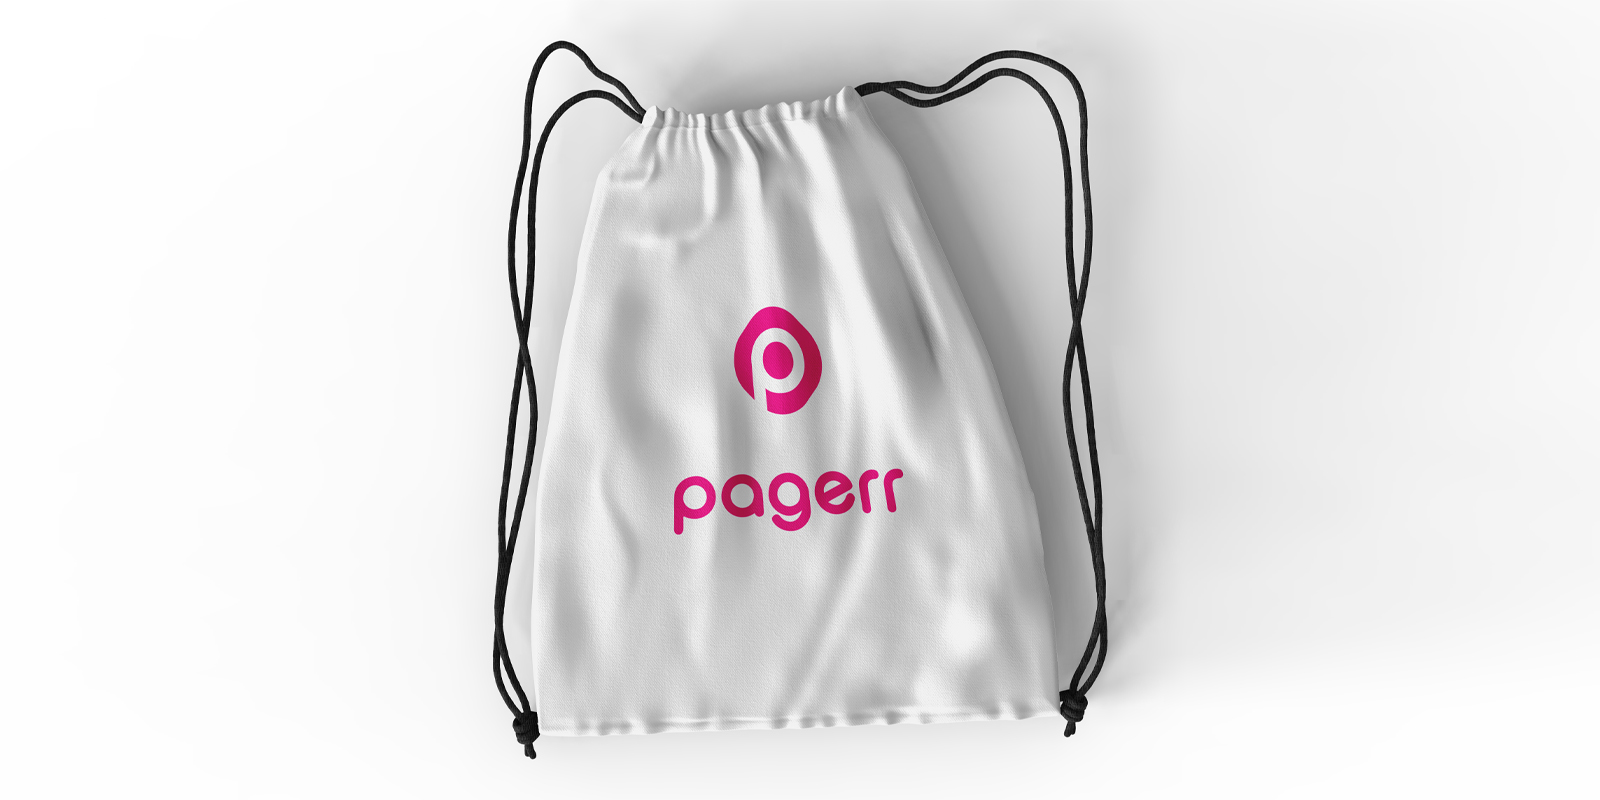 Drawstring backpacks in Berlin - Print with Pagerr